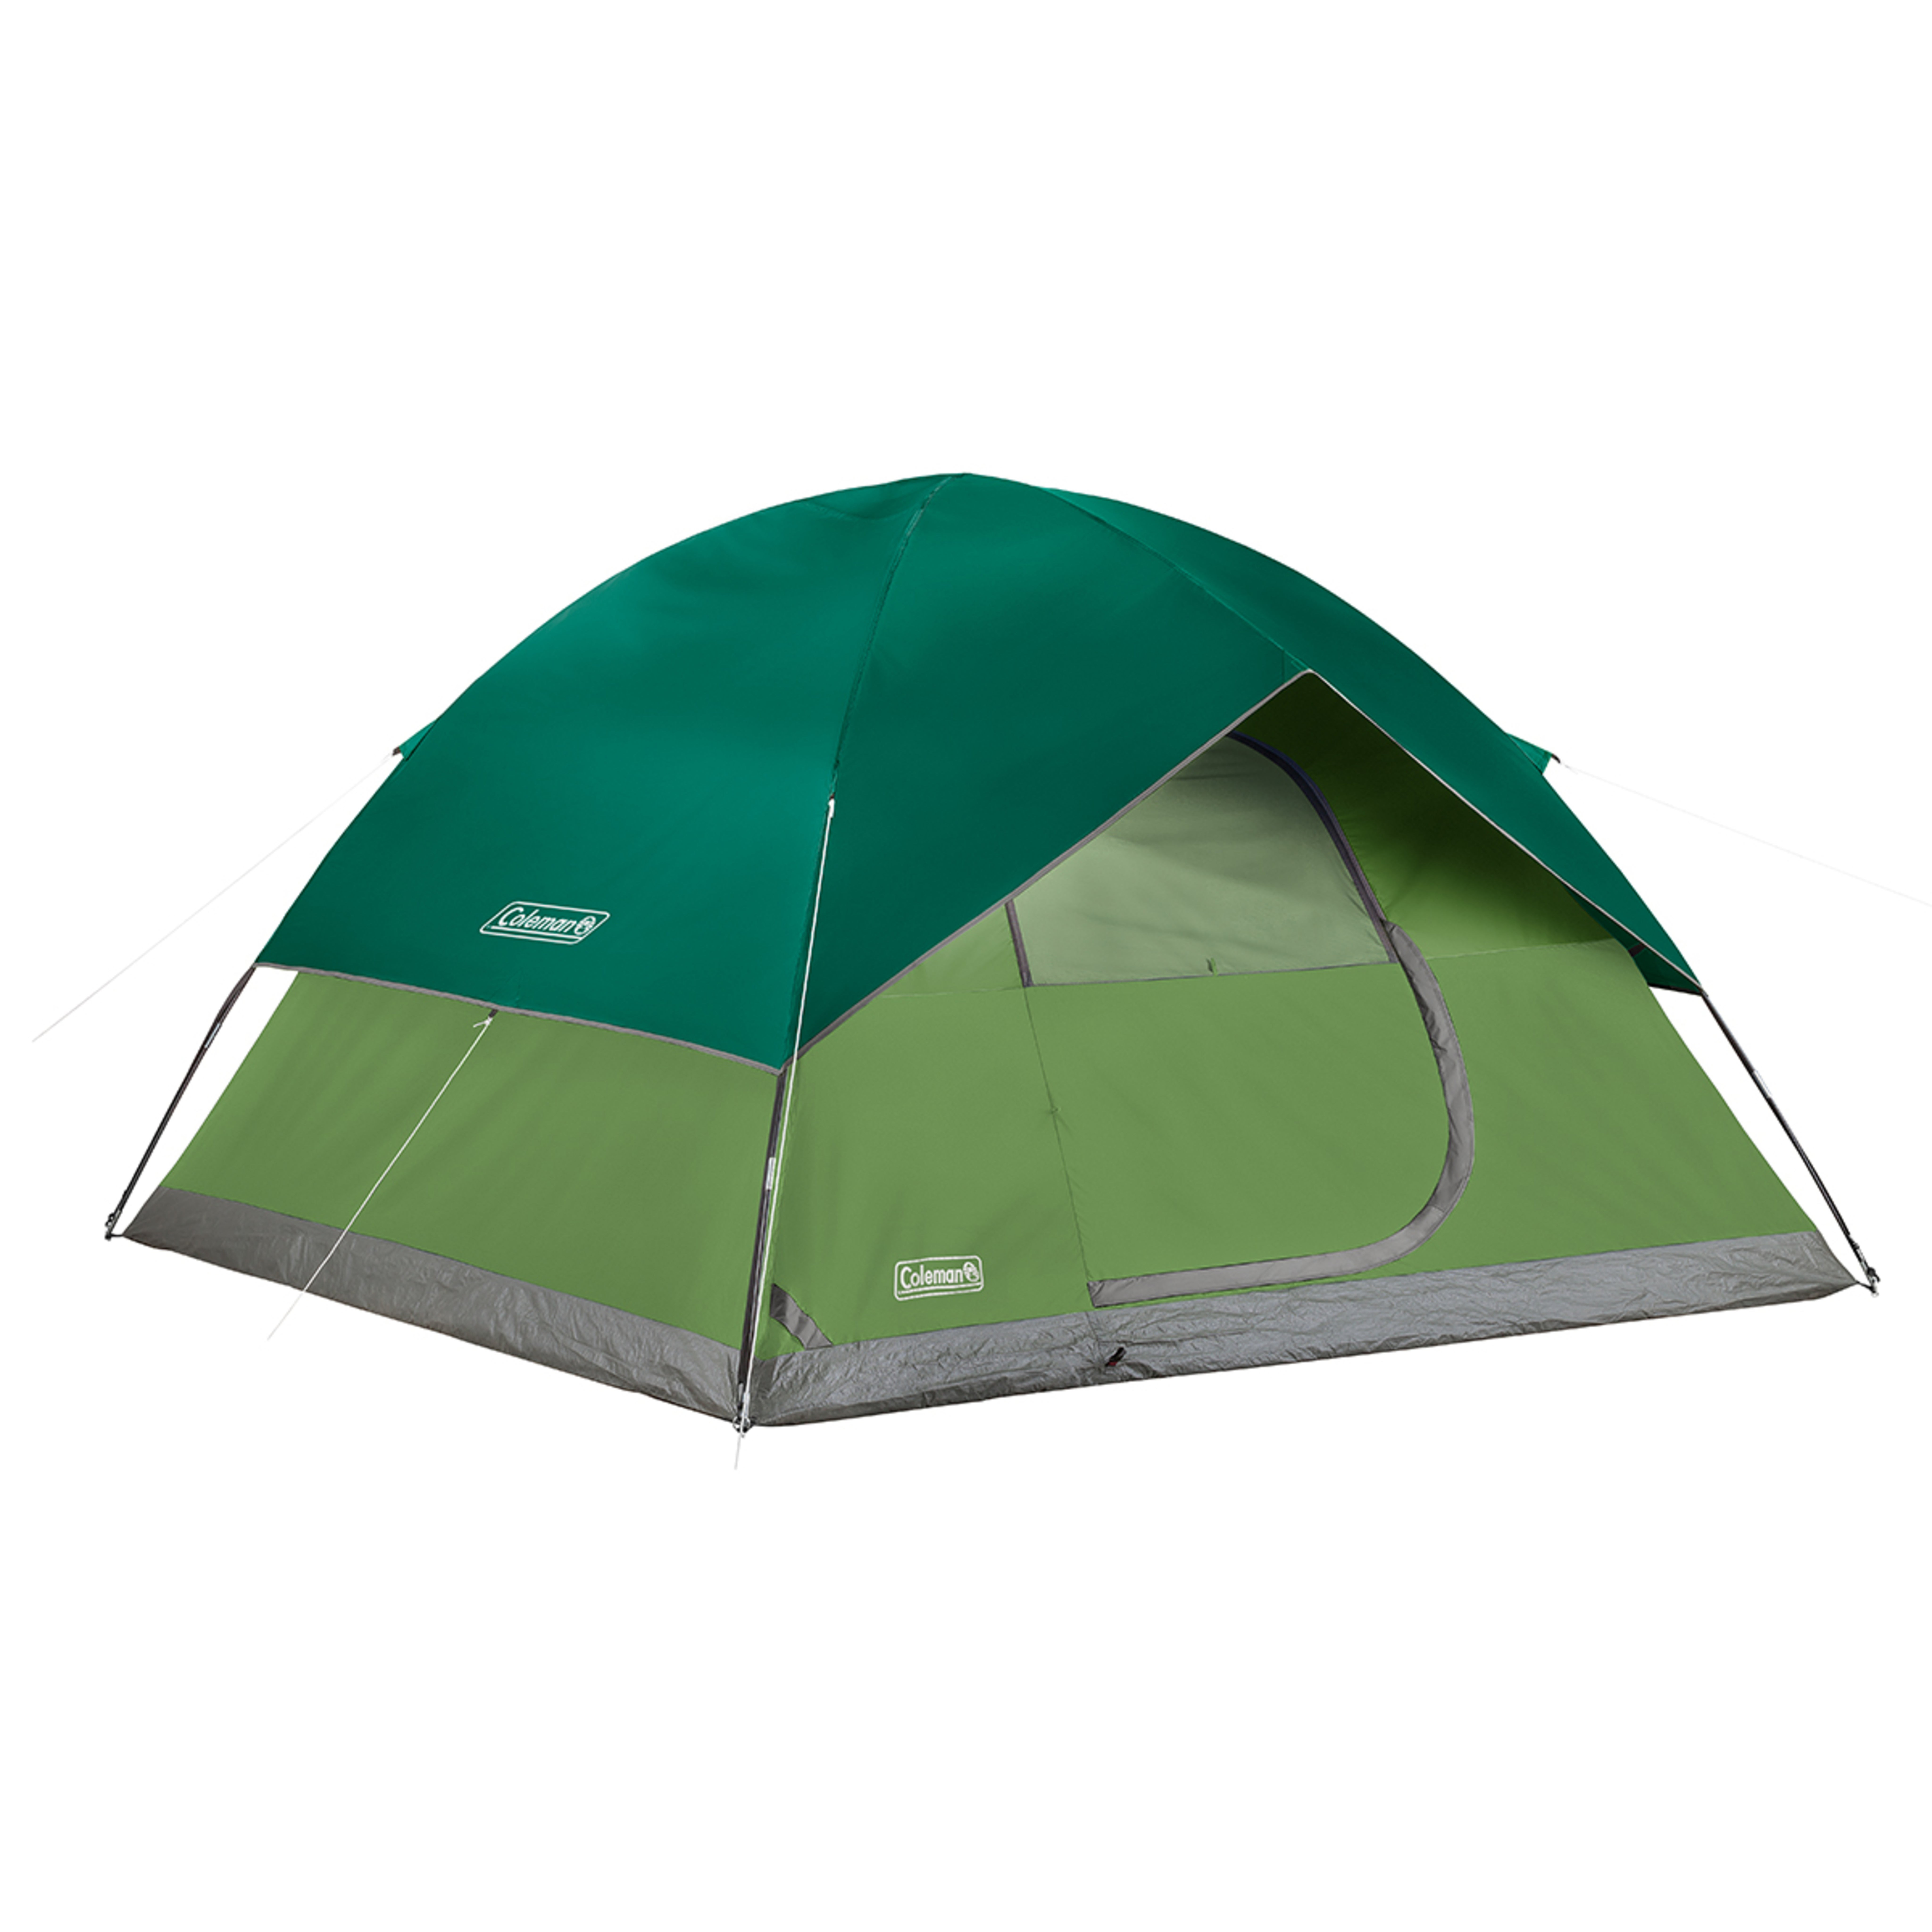 Sundome 6-Person Camping Tent Spruce Green